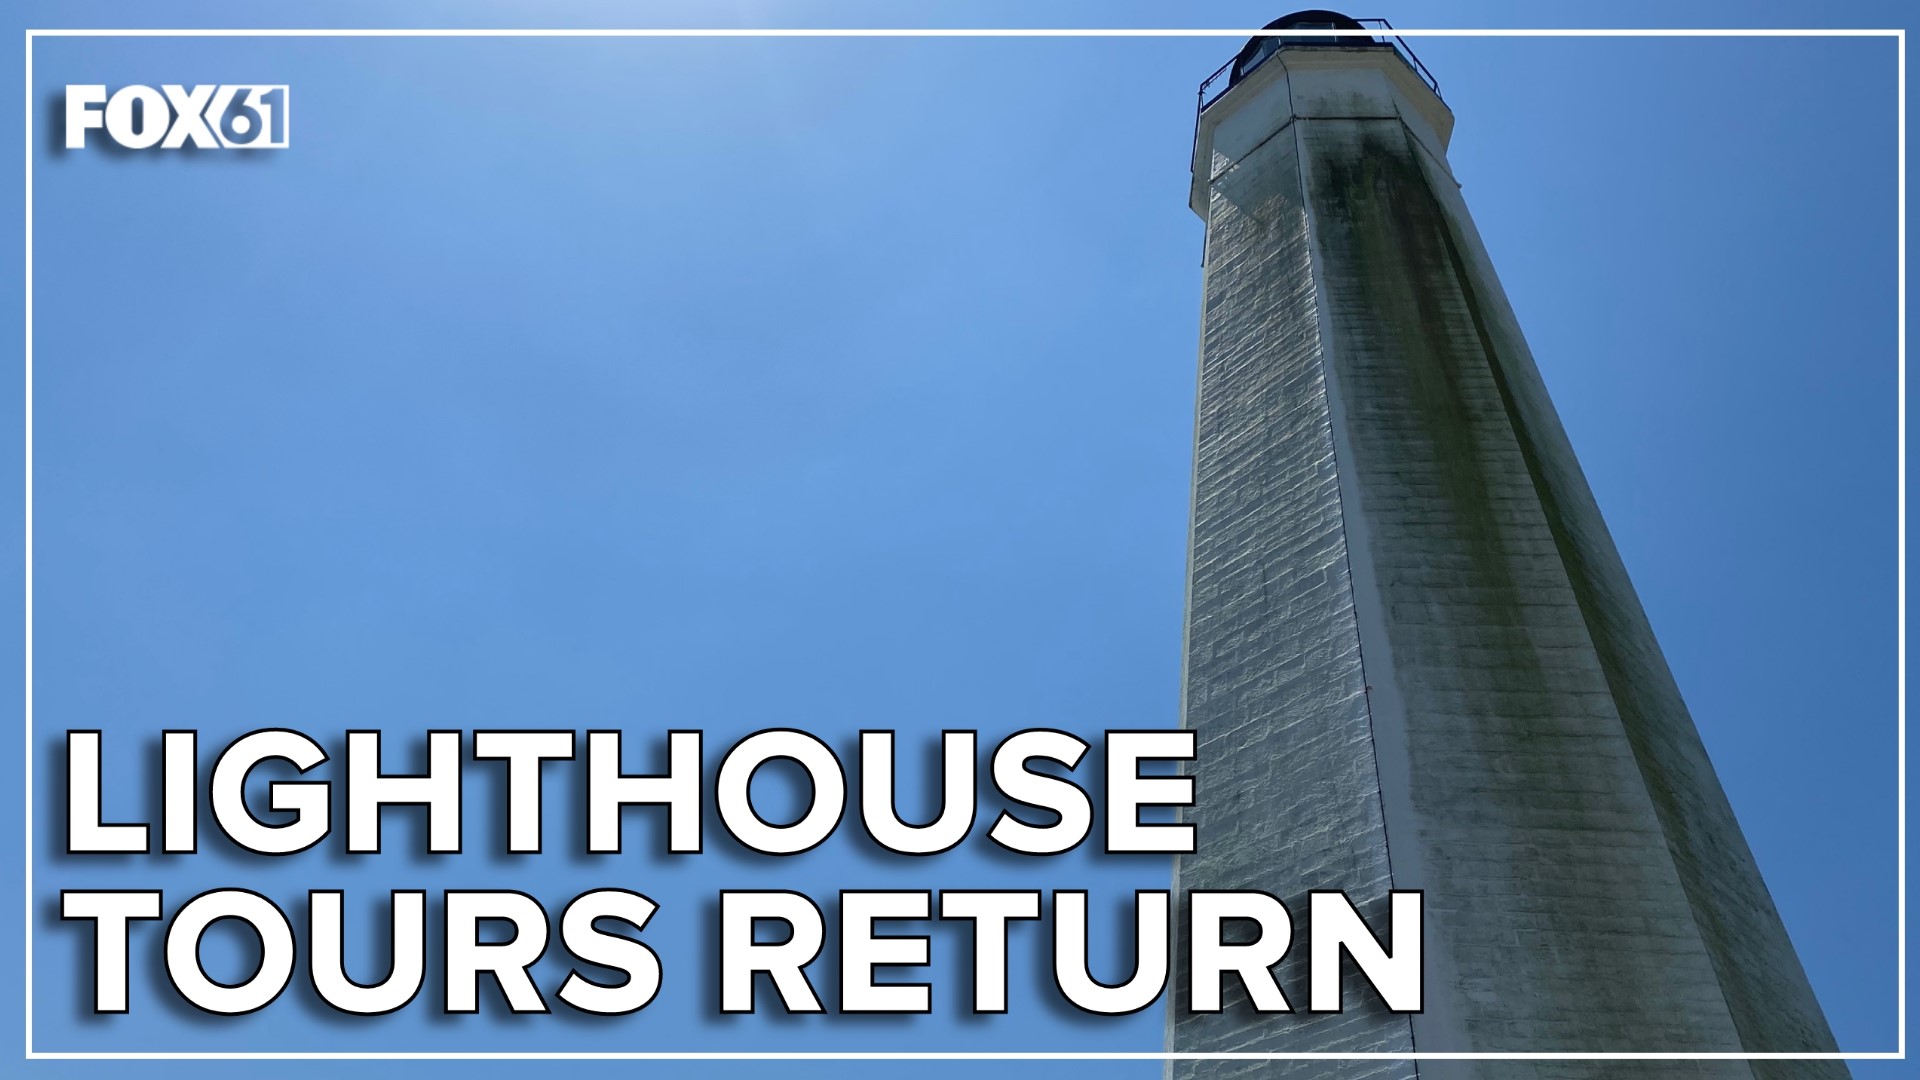 Three lighthouses will be open to the public to check out this summer.